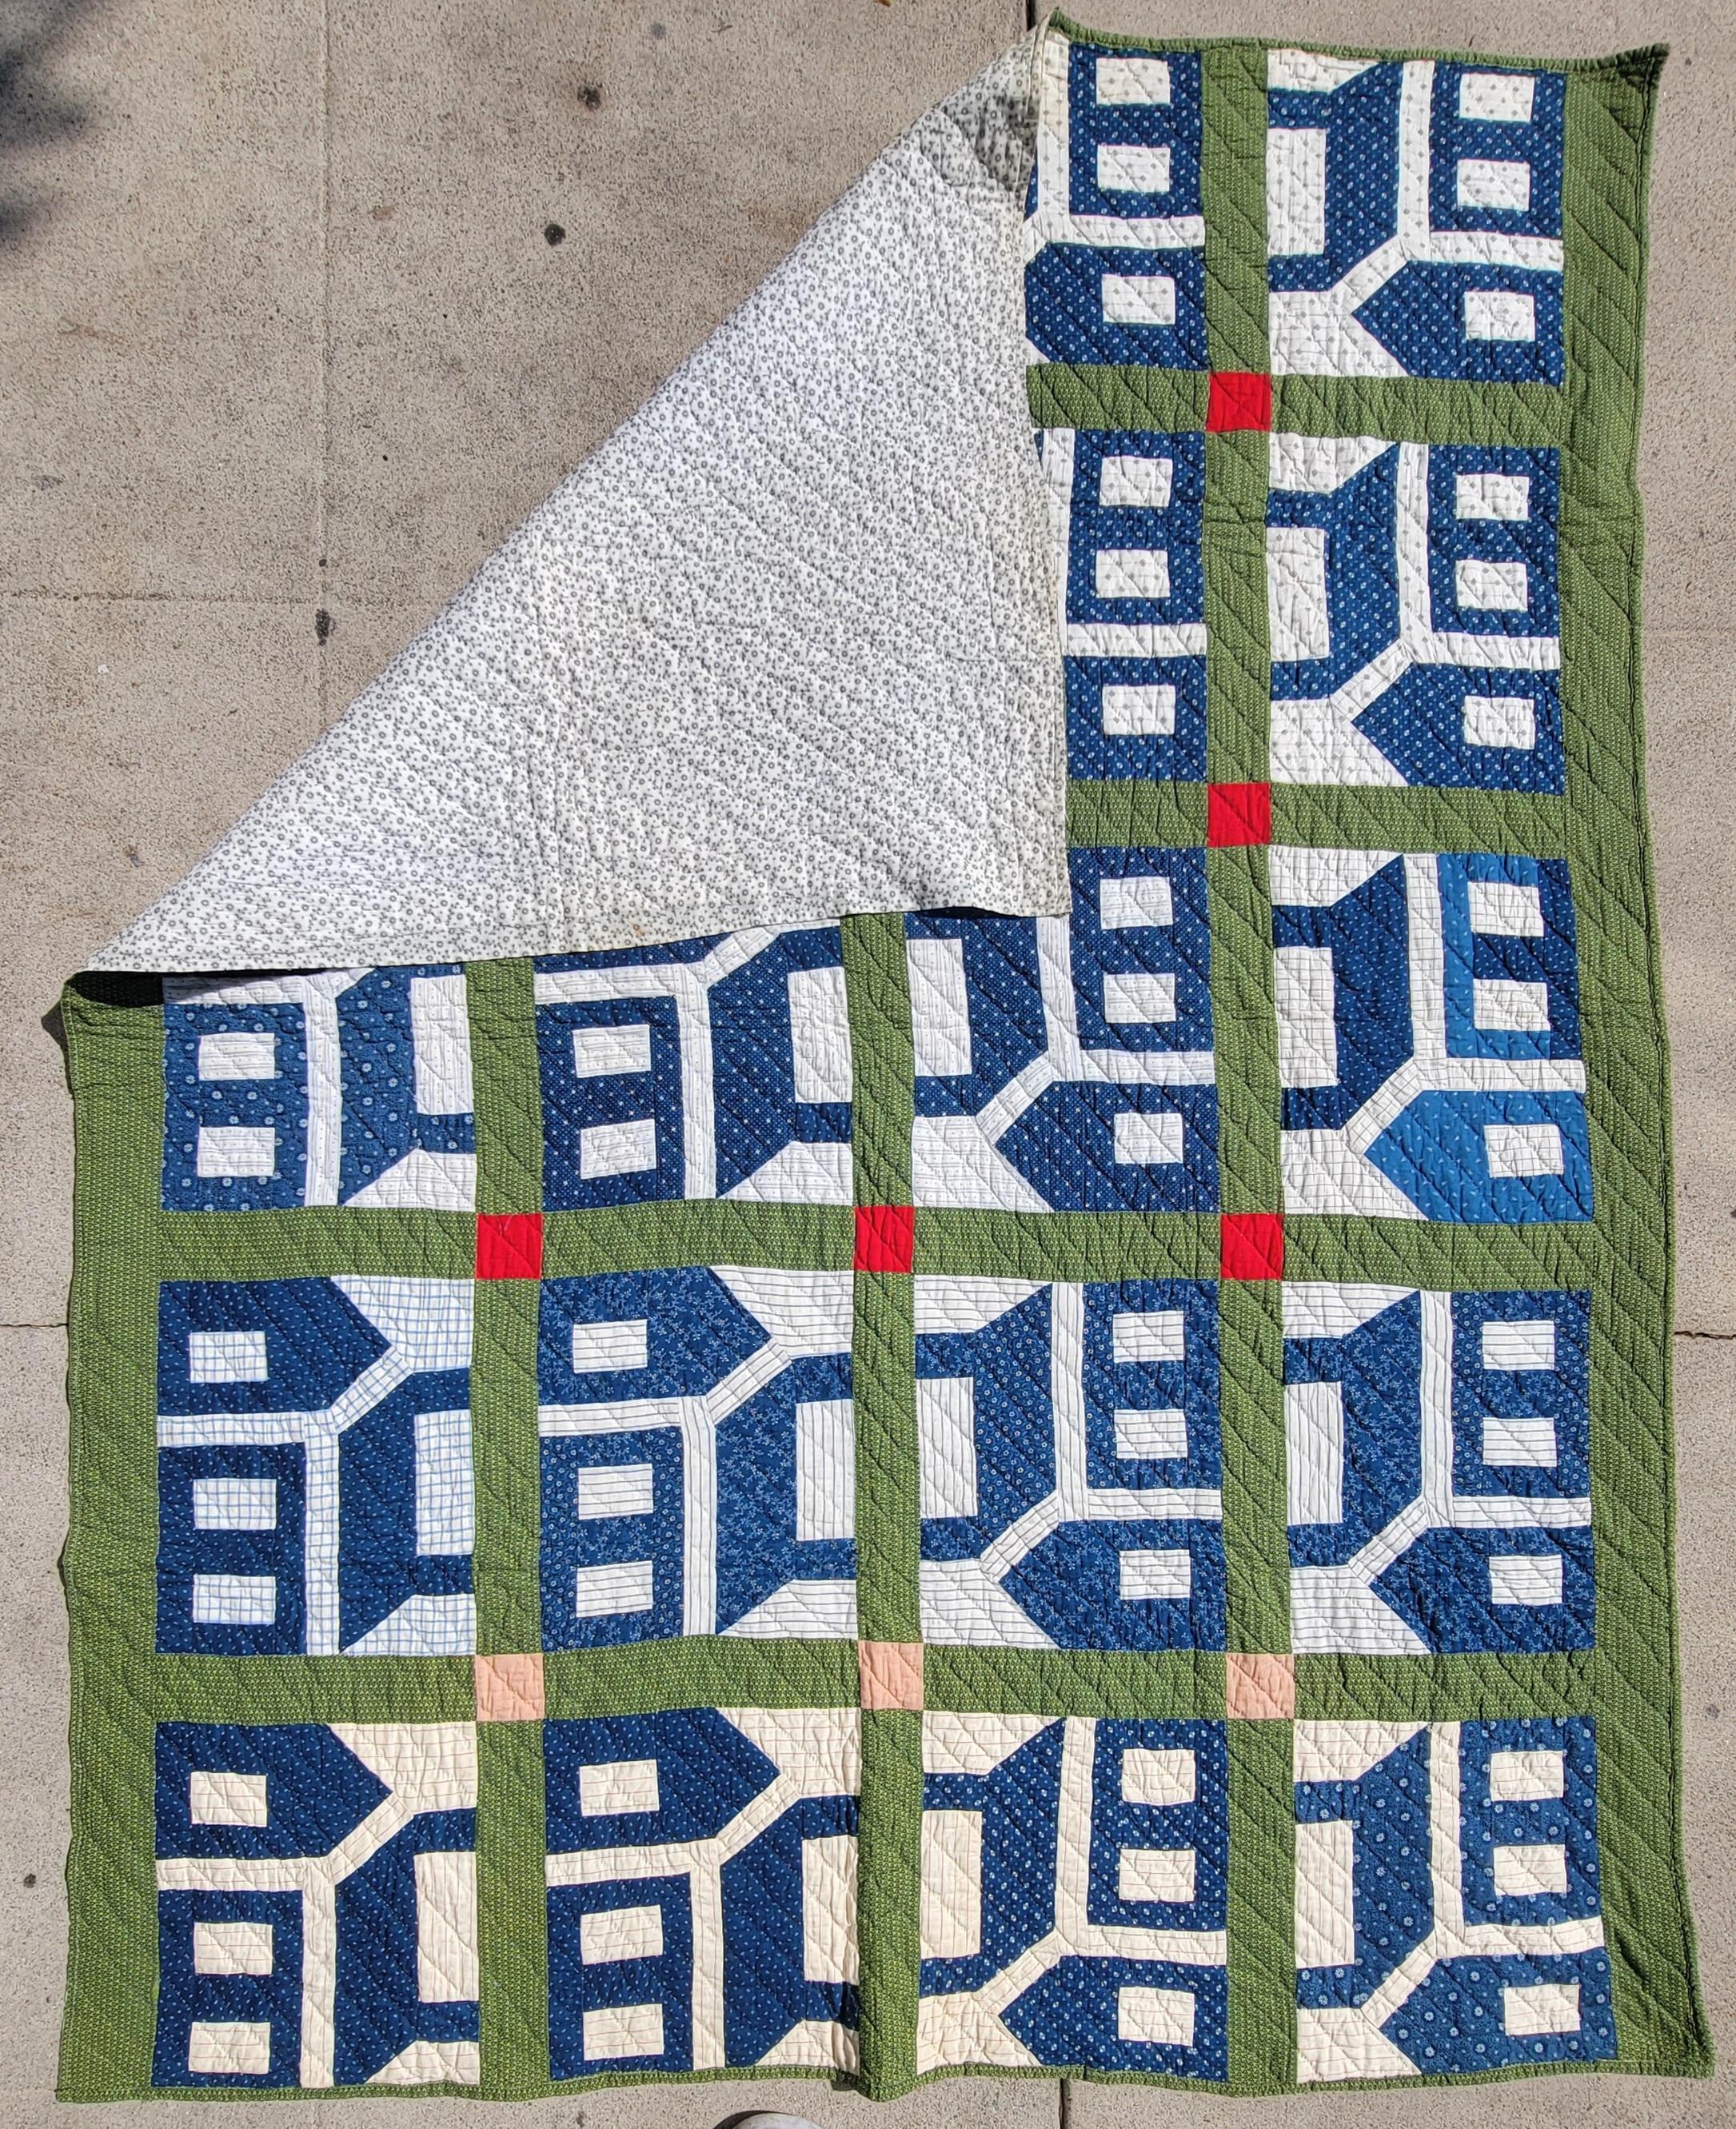 19thc unusual School house quilt. 1880-1890
fantastic school house quilt in fine condition and great quilting. All the schools face in one direction and a few of the schools on the quilt have a n amazing blue color.